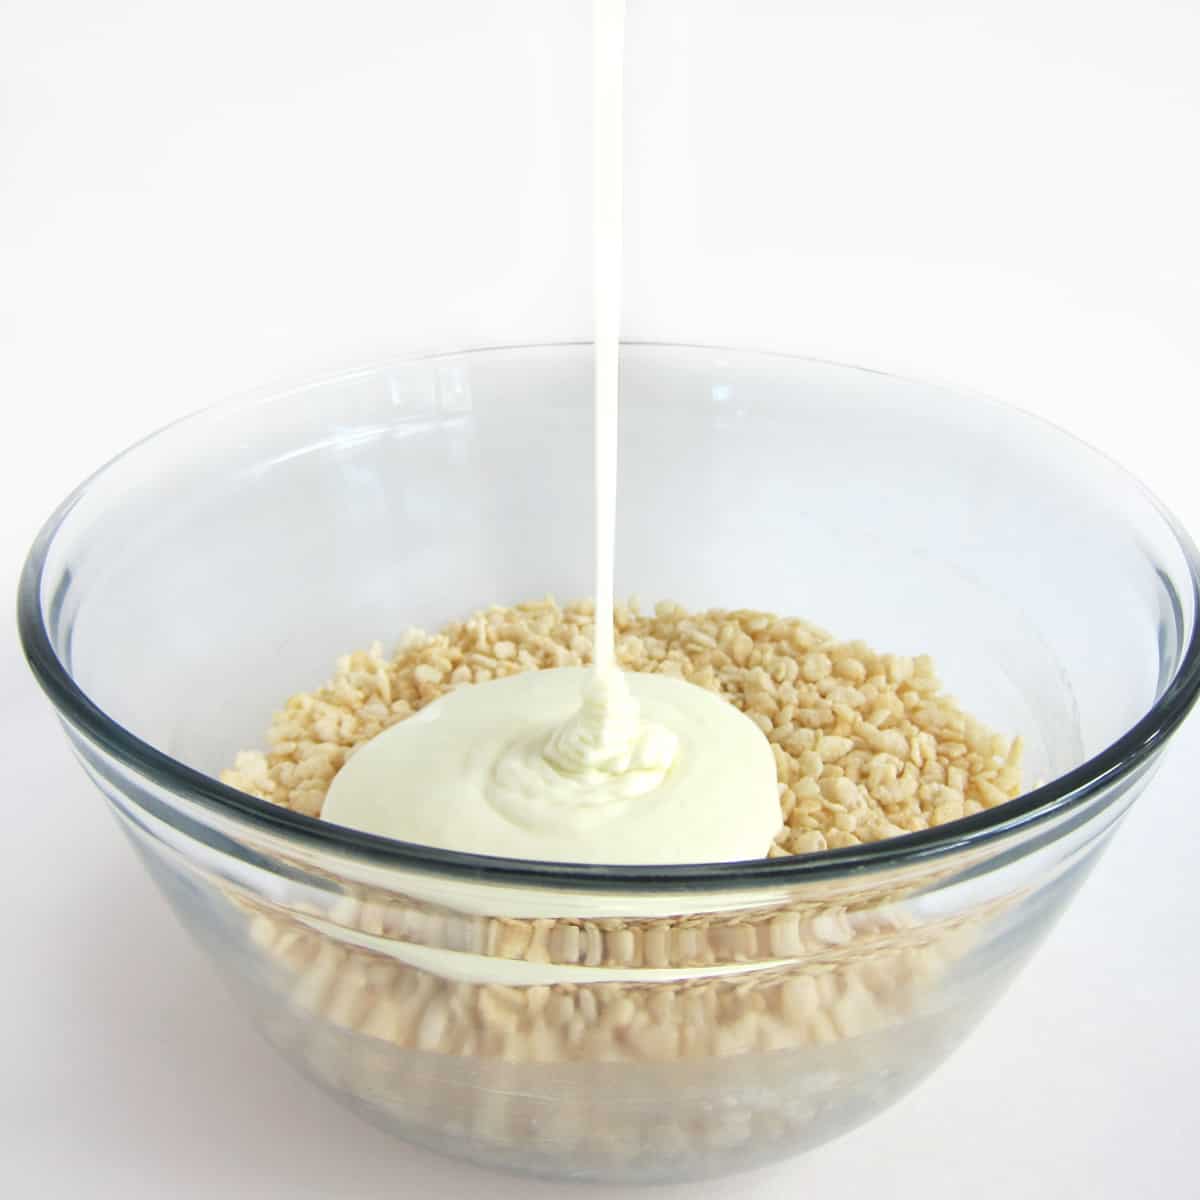 Pouring melted butter and marshmallows into a bowl of Rice Krispies cereal to make crispy treats.